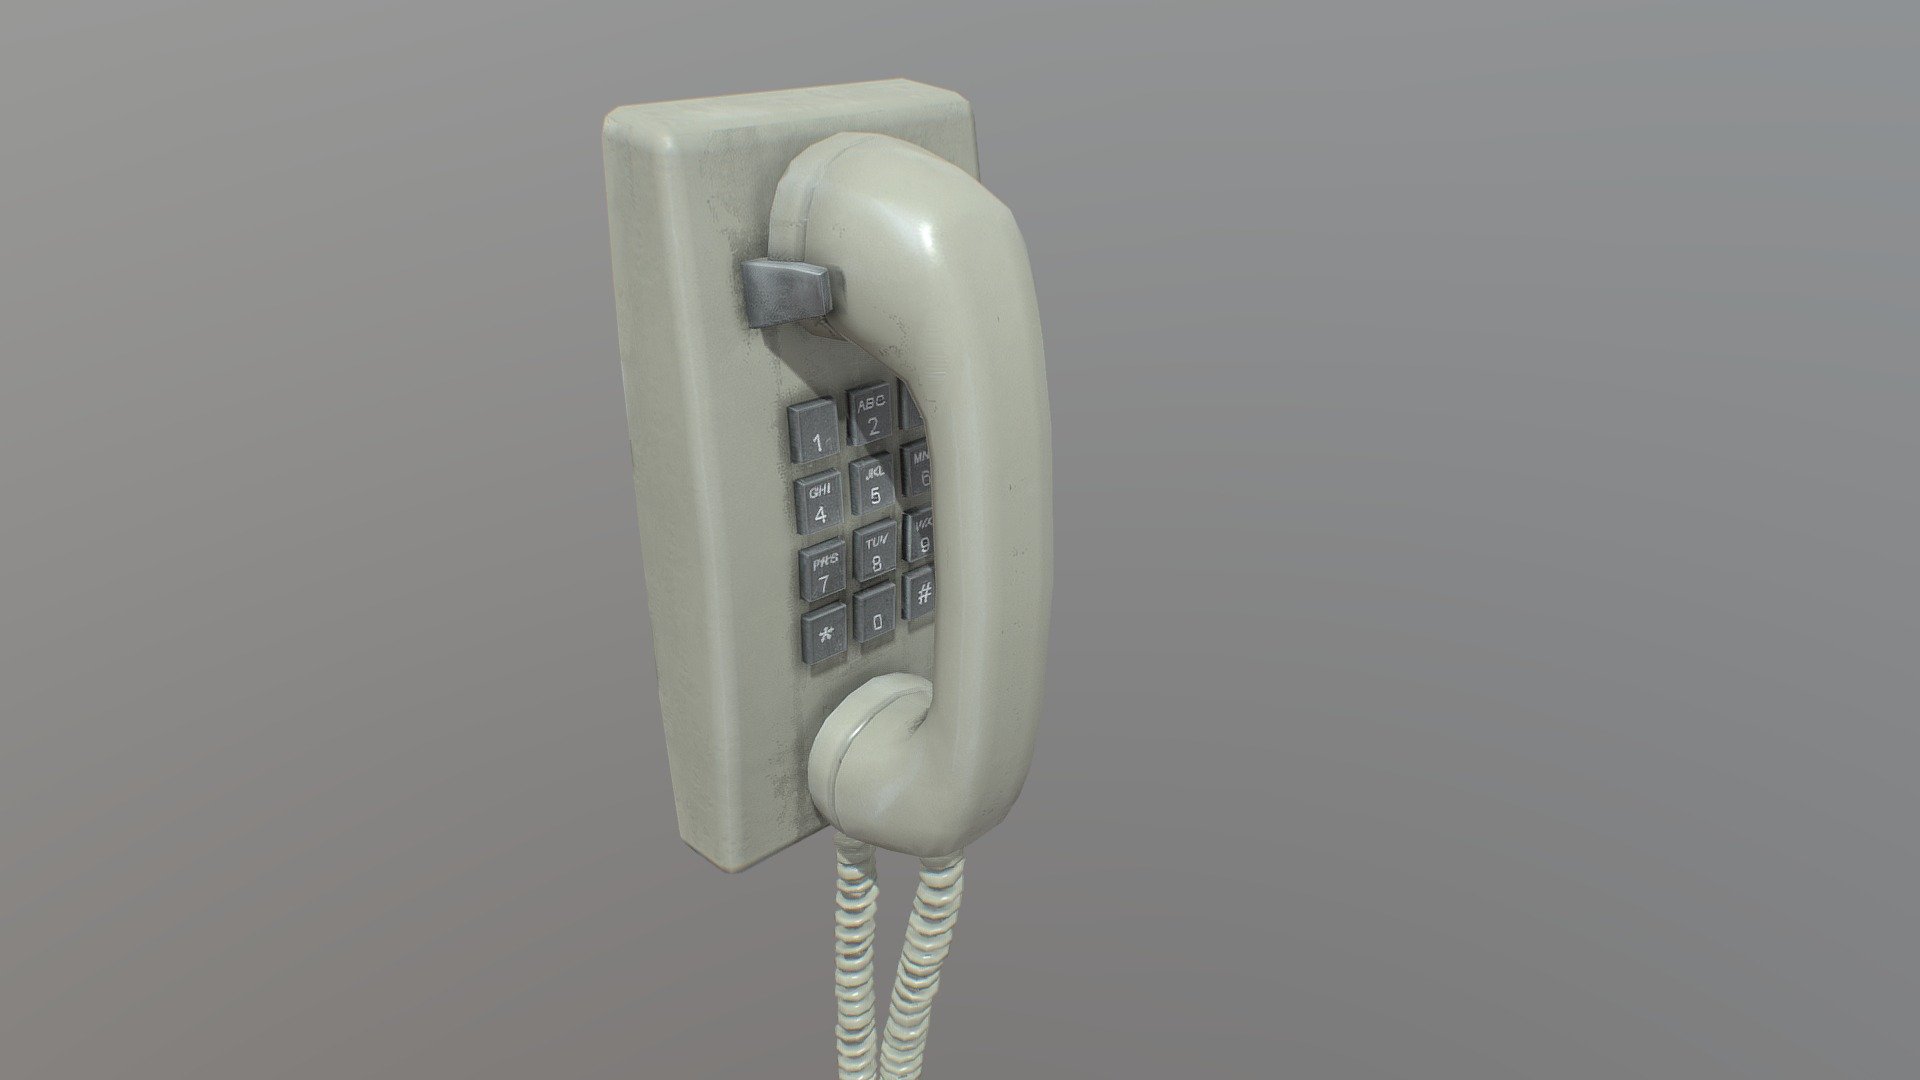 A vintage phone we removed from the kitchen. Strangely, it stills ring but no response when you pick it up, just a long silence&hellip; But hey, it's now available here!

Comes with .blend file, OBJ, STL, GLTF, DAE and FBX format.
Includes 3 LOD levels. 
Roughness, Metallic and AO are combined into a single RMA texture to save performances. Also available separated.
Model is game-ready for Unreal and Unity. Textures are 1k.

If you liked this product, please leave a positive review and follow my work on instagram/flynneaswood.

https://youtu.be/OqKiWBlbr0M - Vintage Mounted Phone - Buy Royalty Free 3D model by FlynnEastwood (@antoineflynn) 3d model